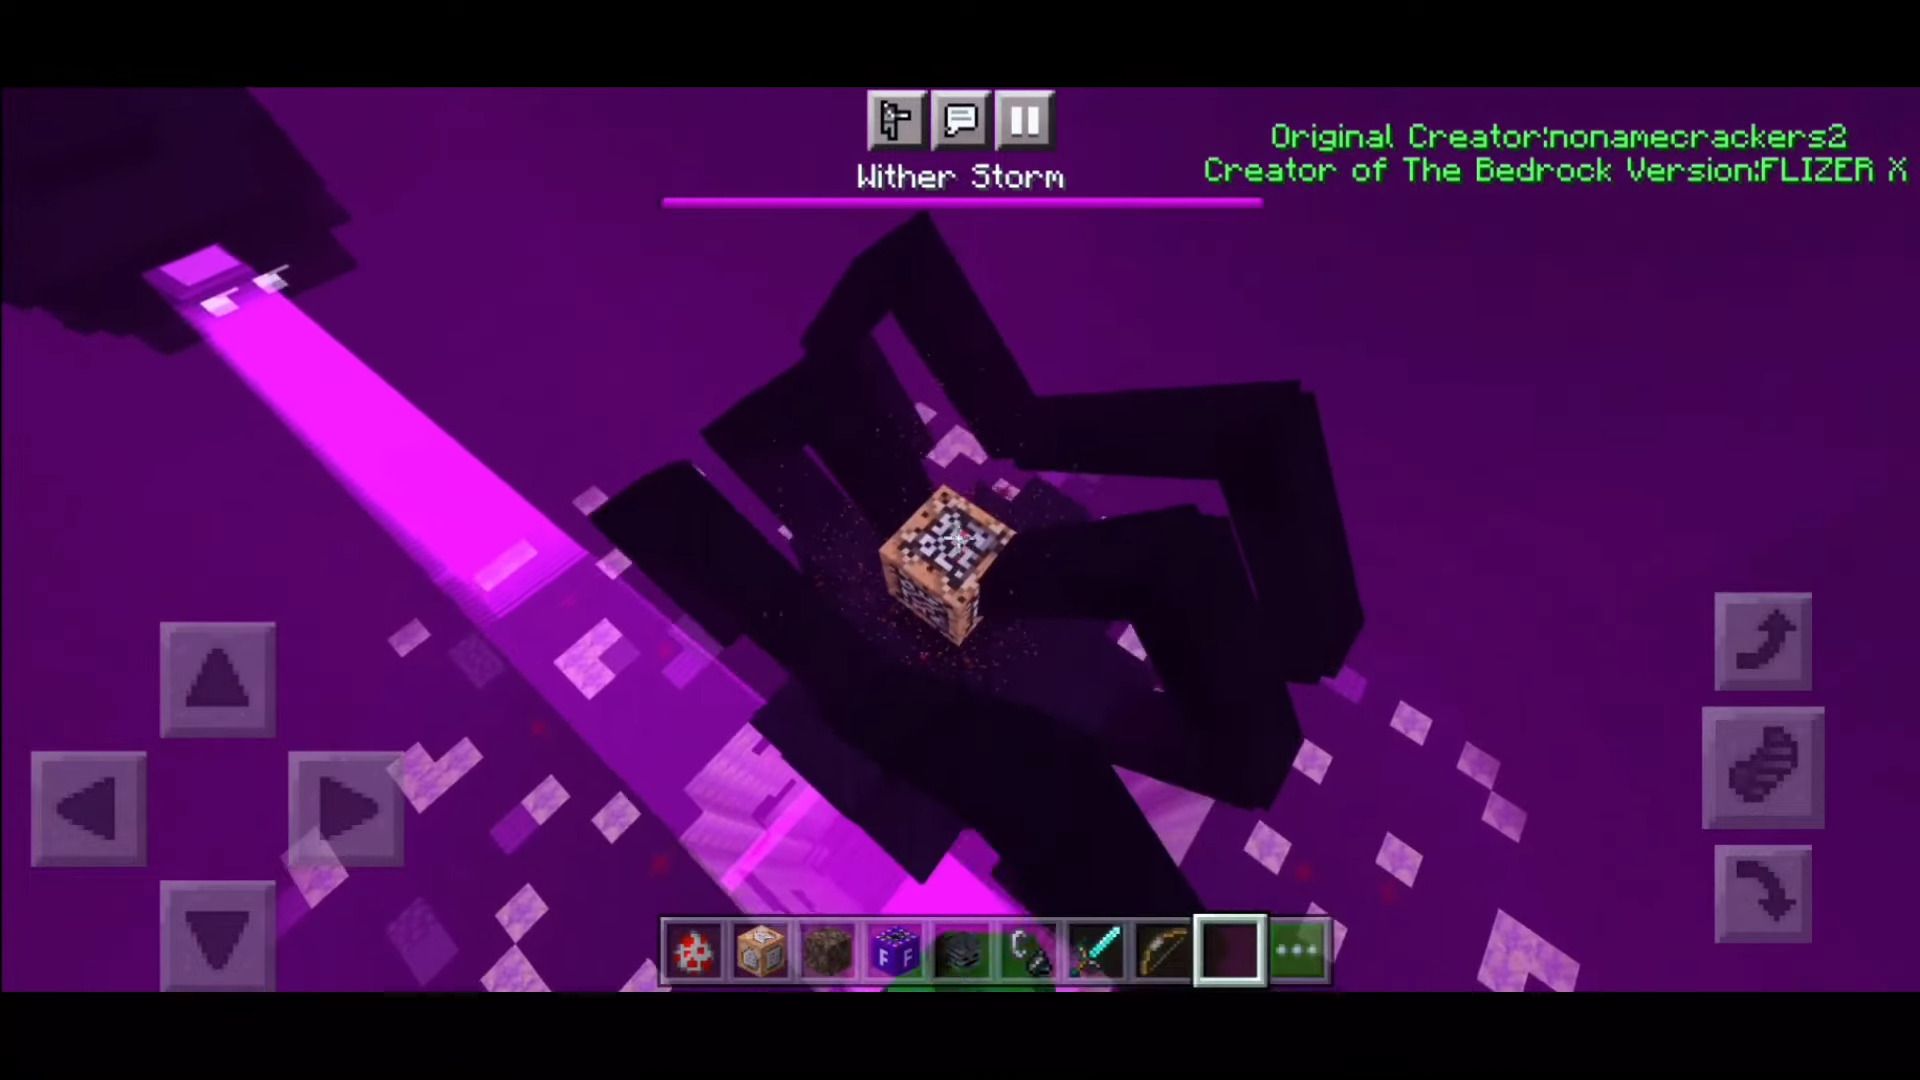 Cracker's Wither Storm MOD in Minecraft 